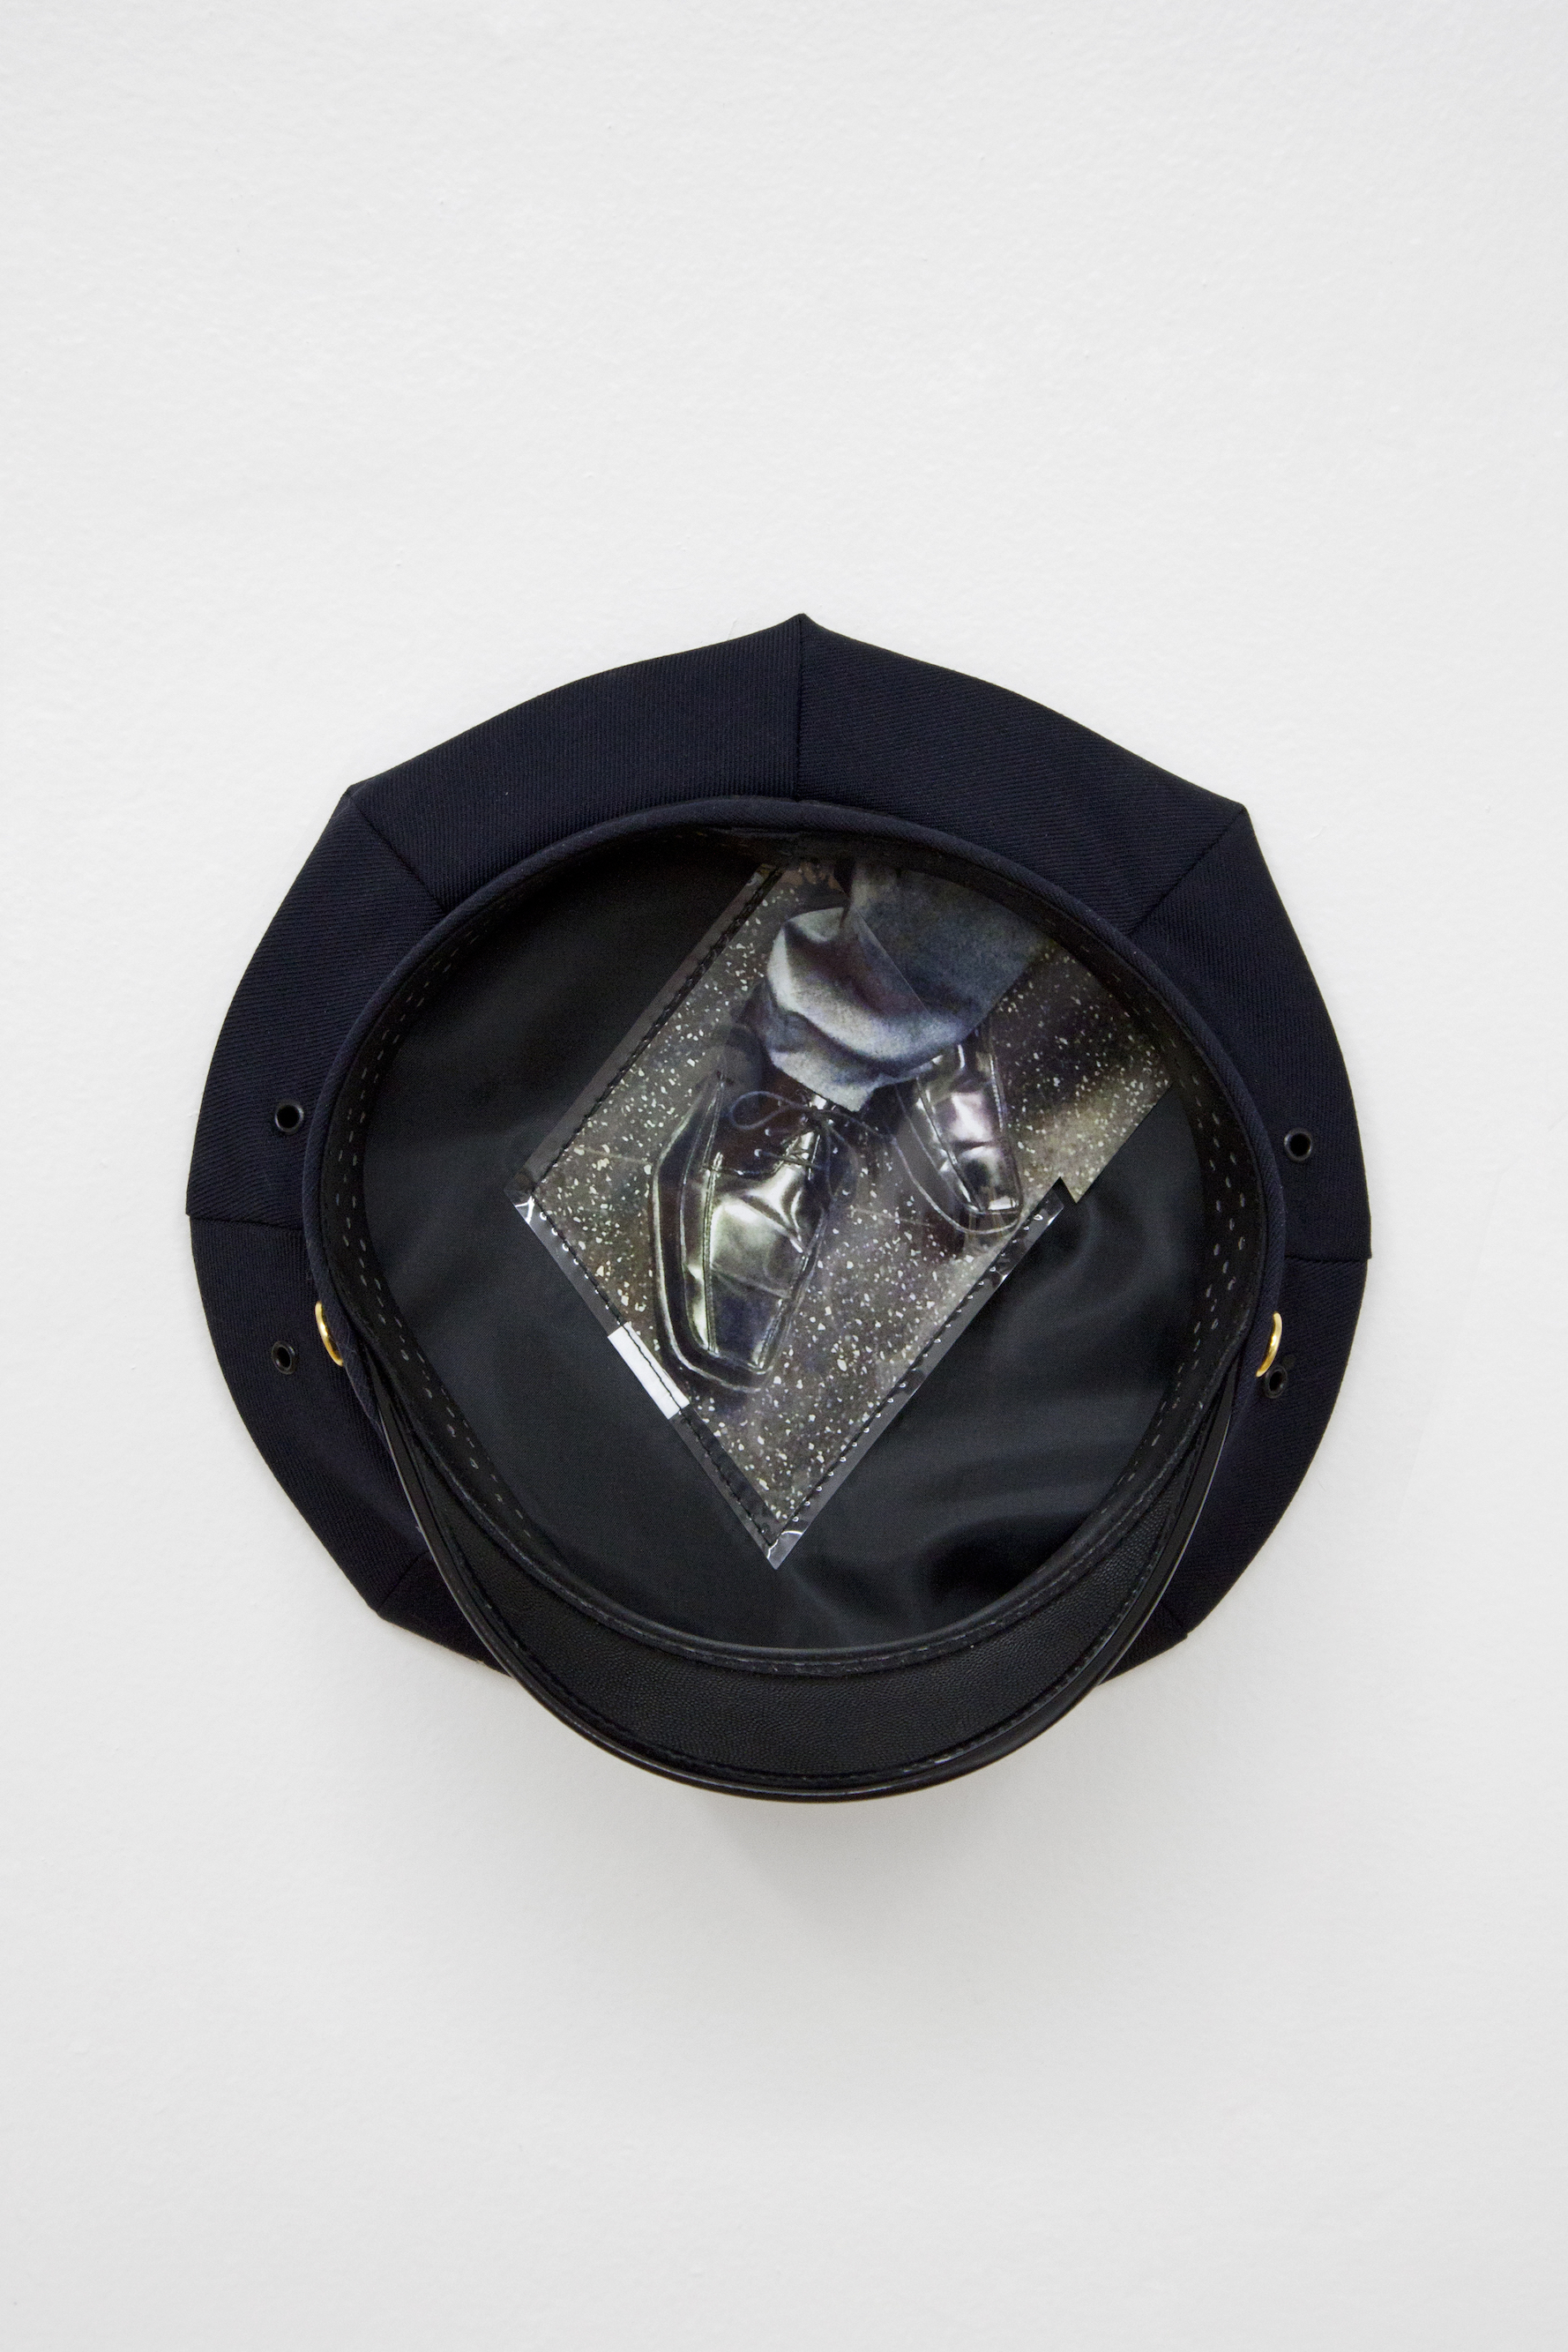 Under Their Hats (box toe 1), 2017 (detail) Police issued hat, digital c-print 10 x 10 x 5 1/2 inches / 25.4 x 25.4 x 14 cm